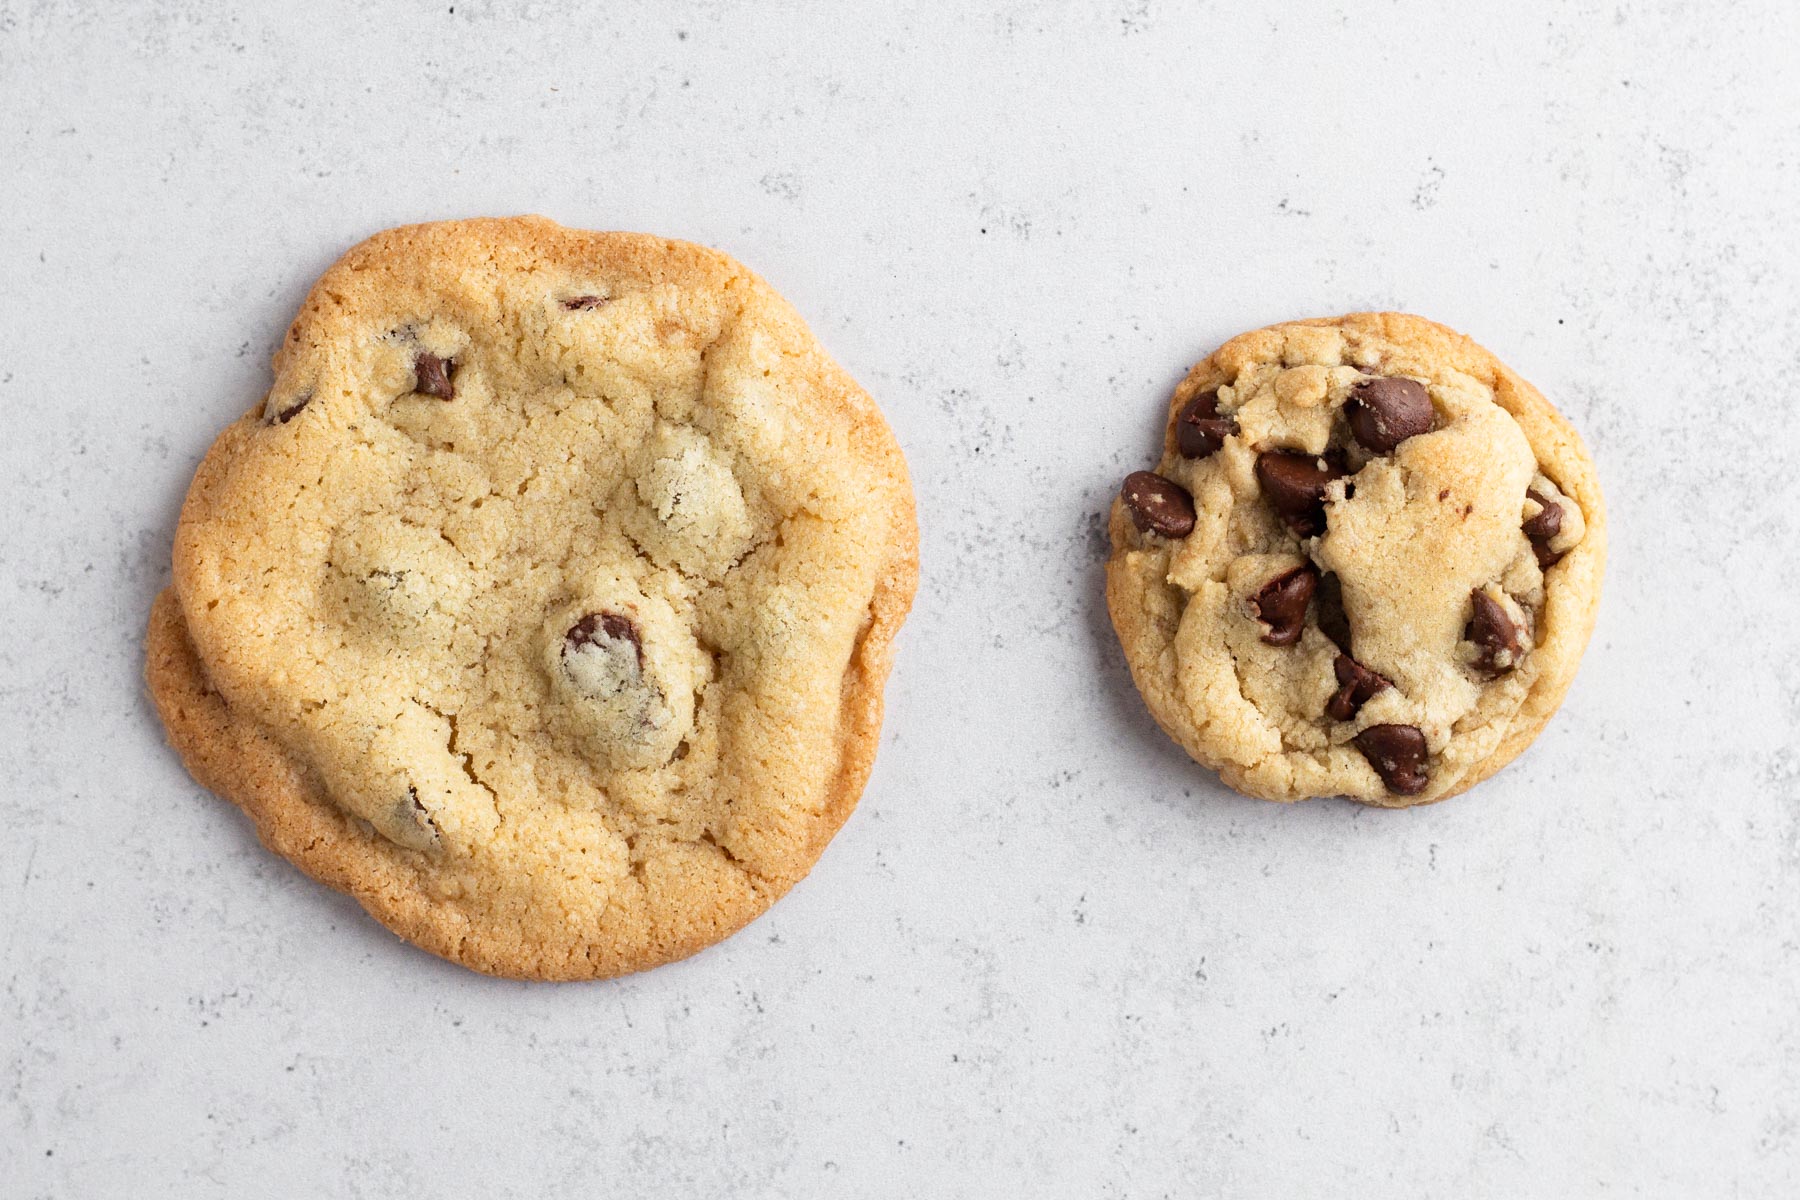 Flat and thick chocolate chip cookies side by side on a gray surface.